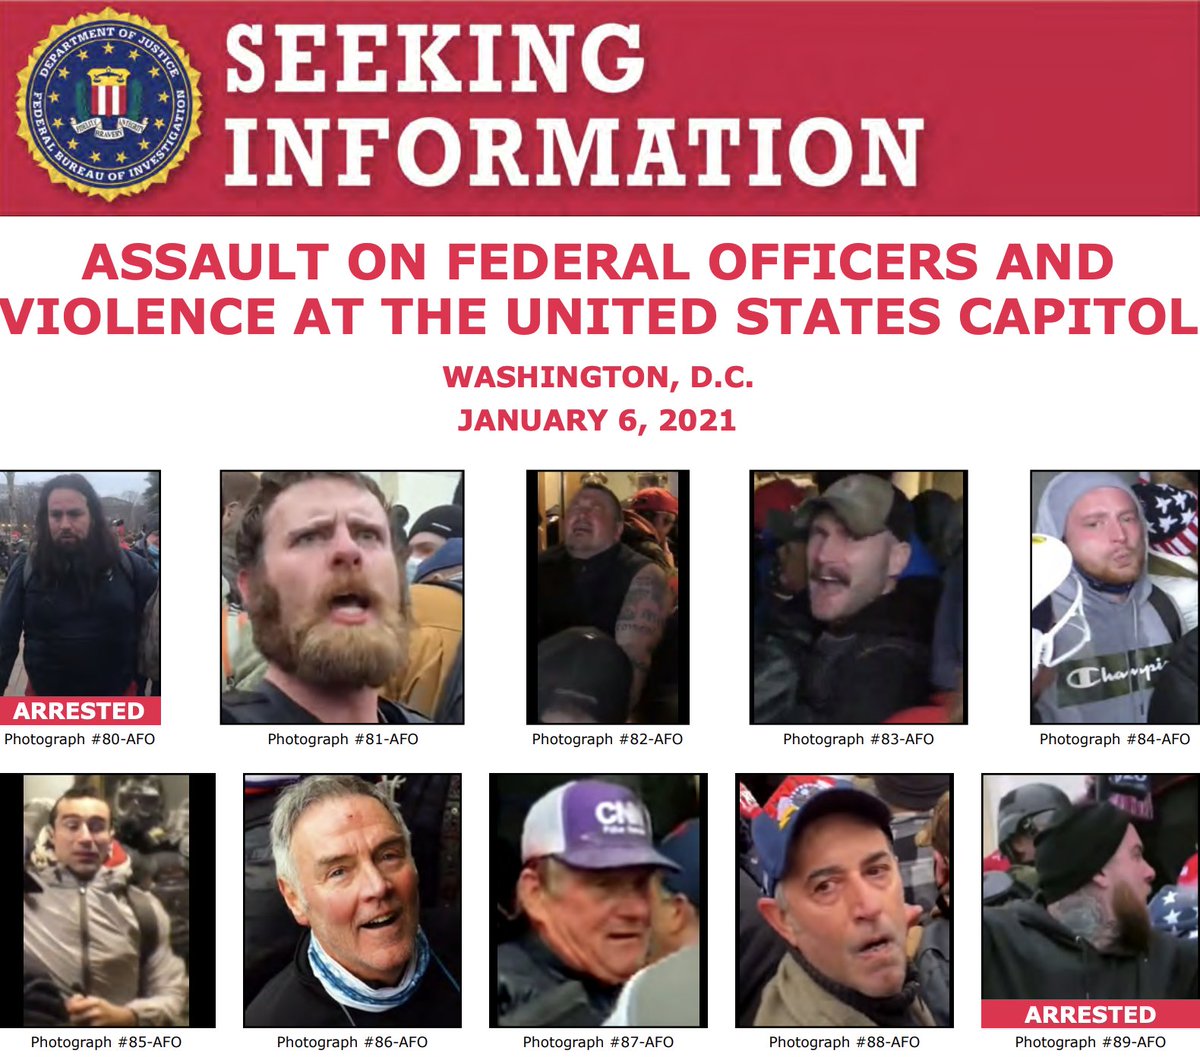 Keep the tips coming! The #FBI has arrested multiple people in connection with the violence at the U.S. Capitol on January 6. Help us identify more individuals at ow.ly/z1sX50DeJGn. If you see someone familiar, submit a tip at fbi.gov/USCapitol.